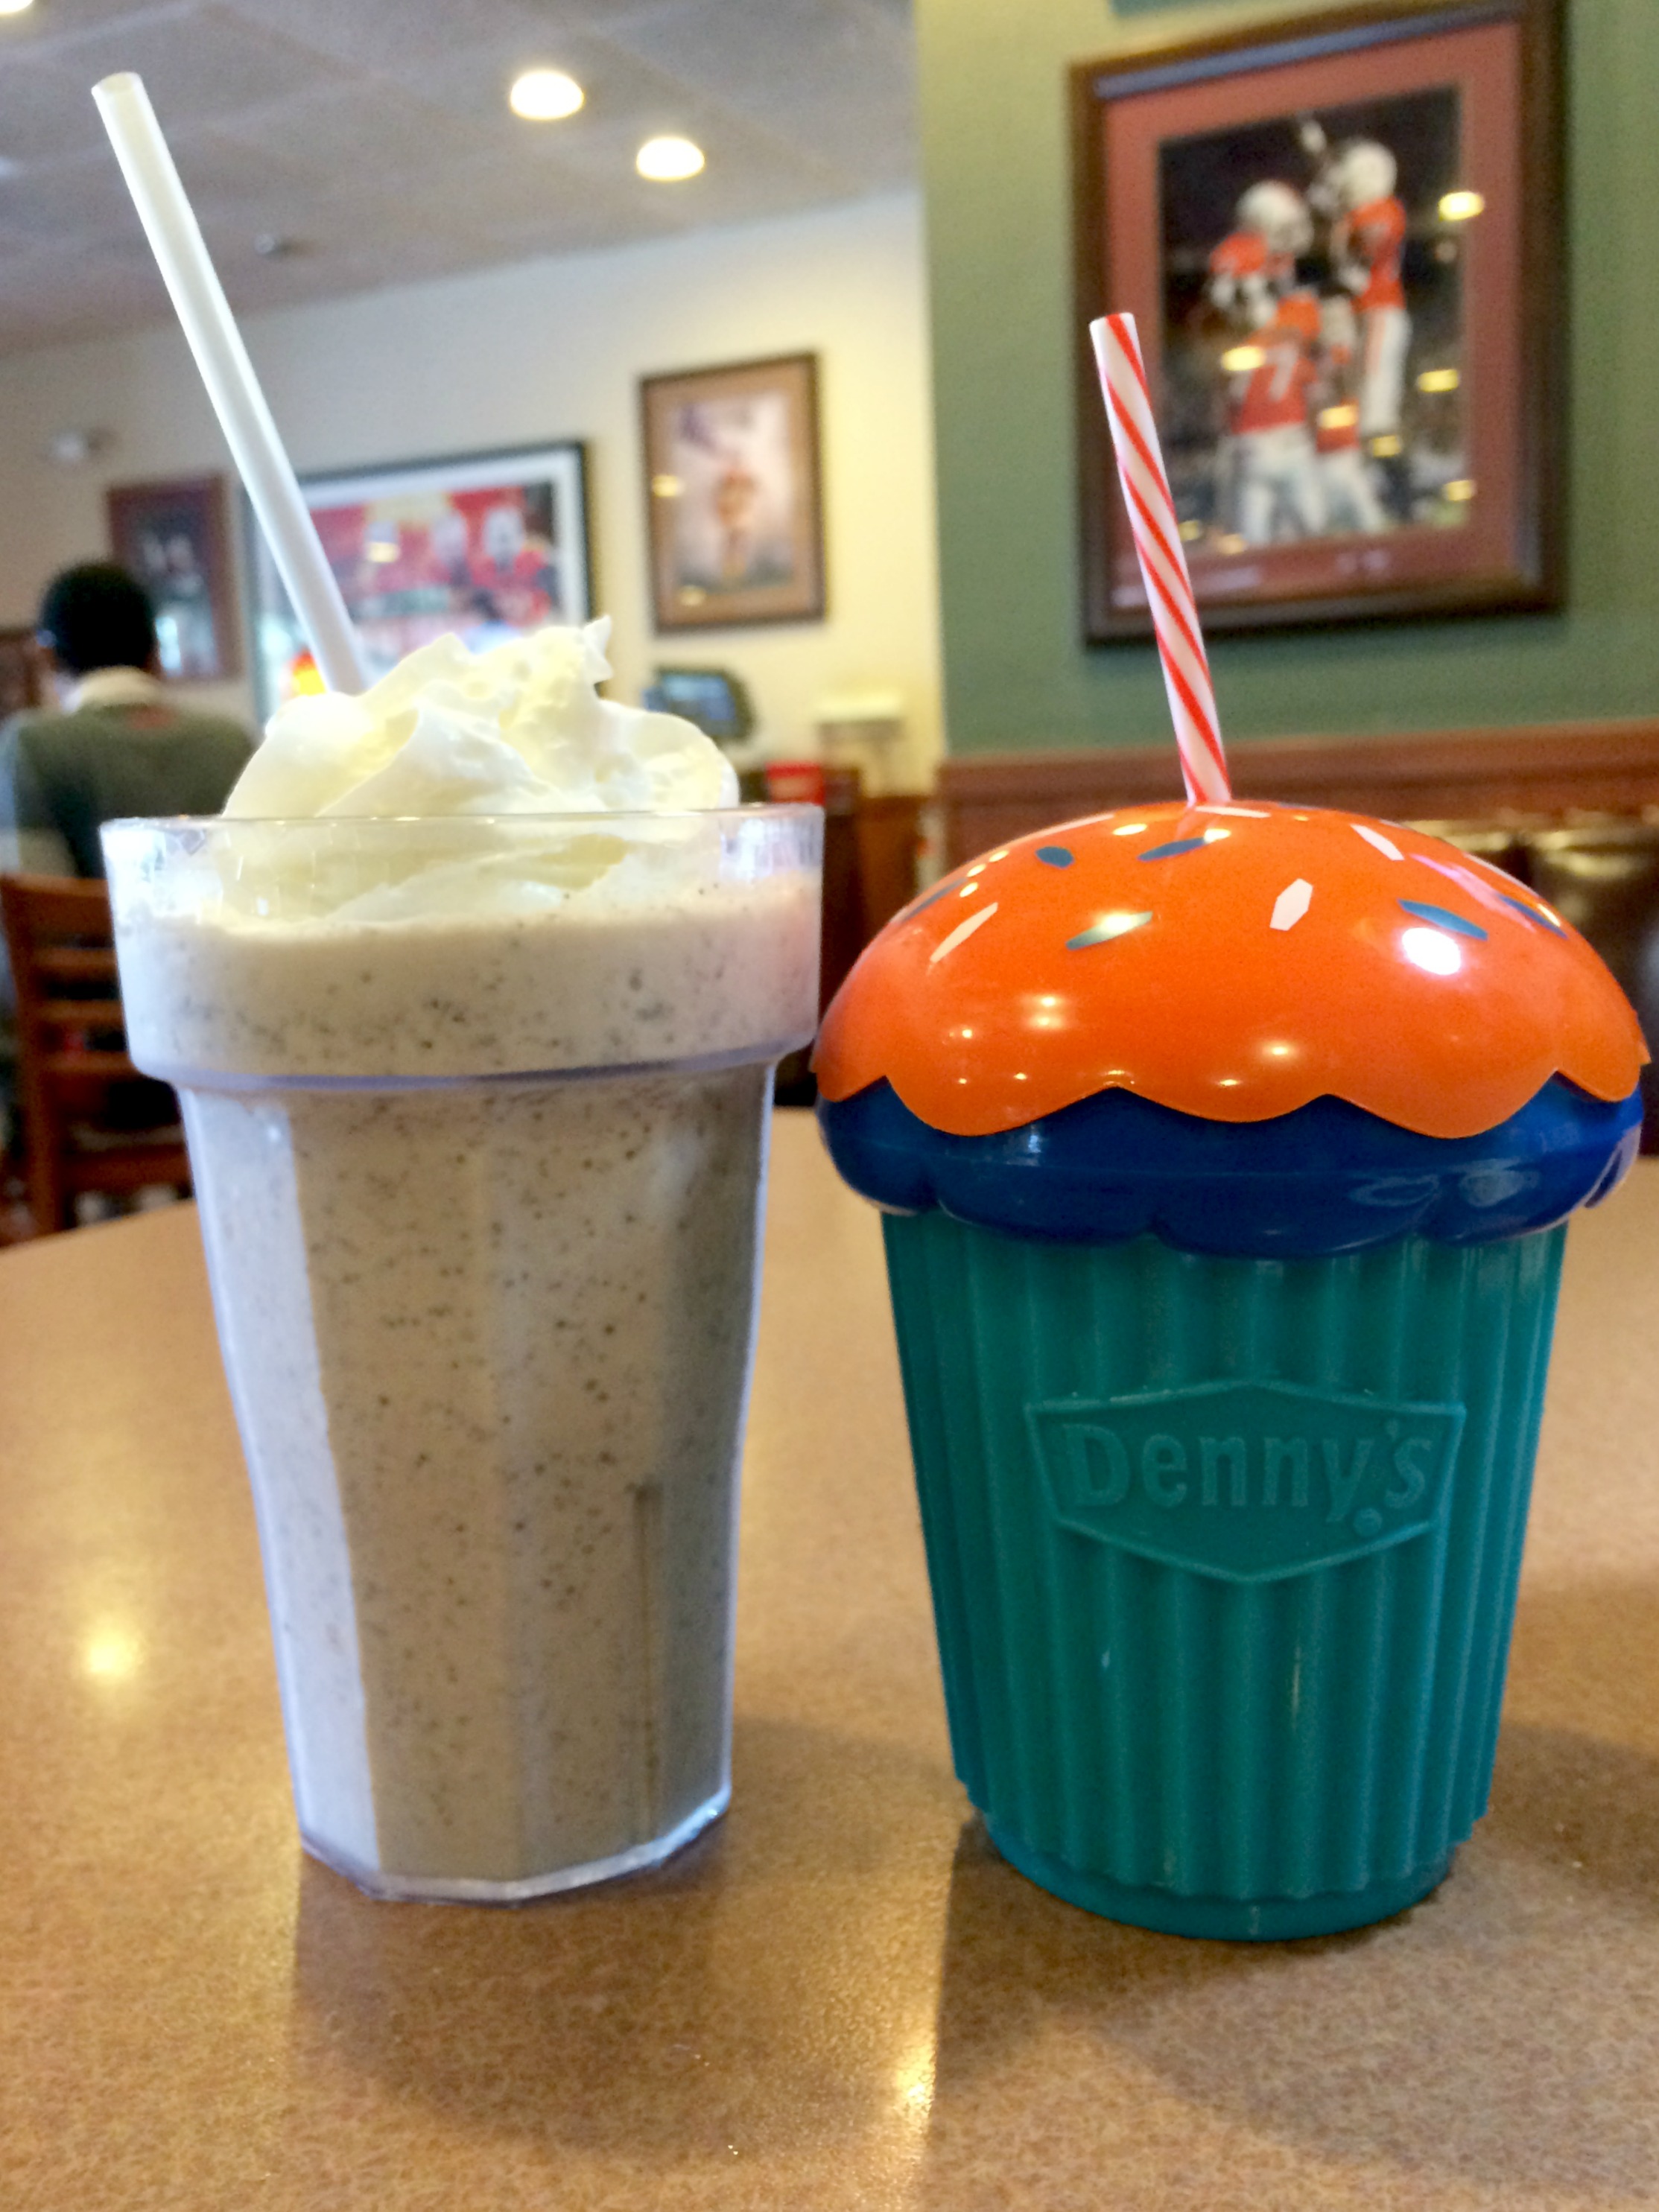 Mommy-Son Date Ideas: The Denny's Lunch Date #DennysDiners - Mommy Mafia